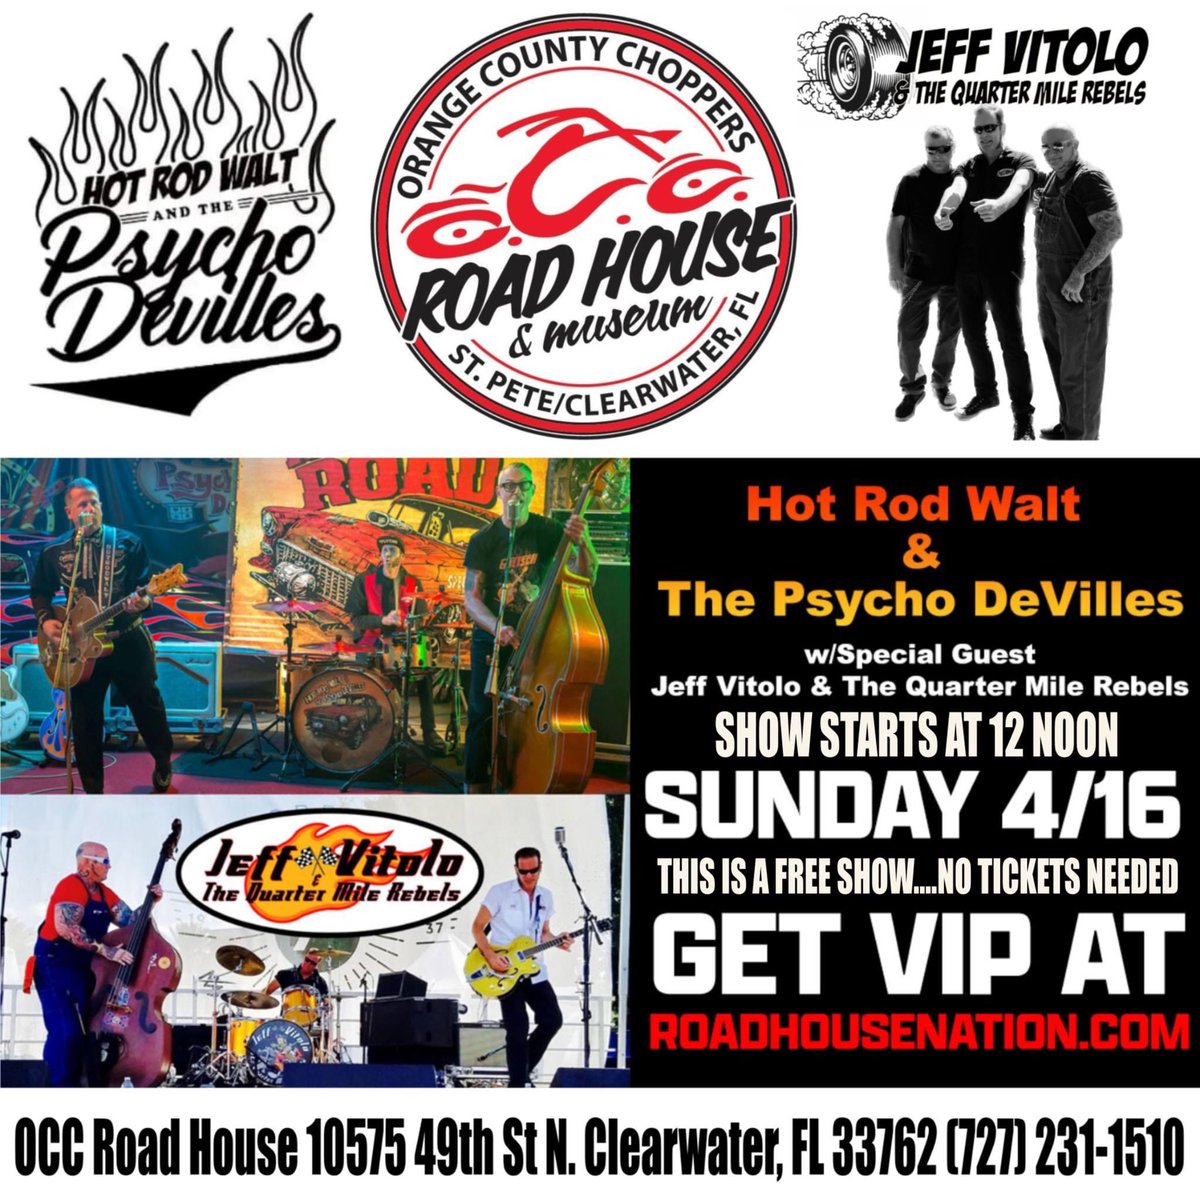 TODAY in Clearwater at @occroadhouse 
It's a Rockabilly extravaganza featuring Hot Rod Walt & The Psycho DeVilles at 4pm and Jeff Vitolo & The Quarter Mile Rebels opening the show at 12noon! Rat rods, rat bikes, pin-up girls and more!